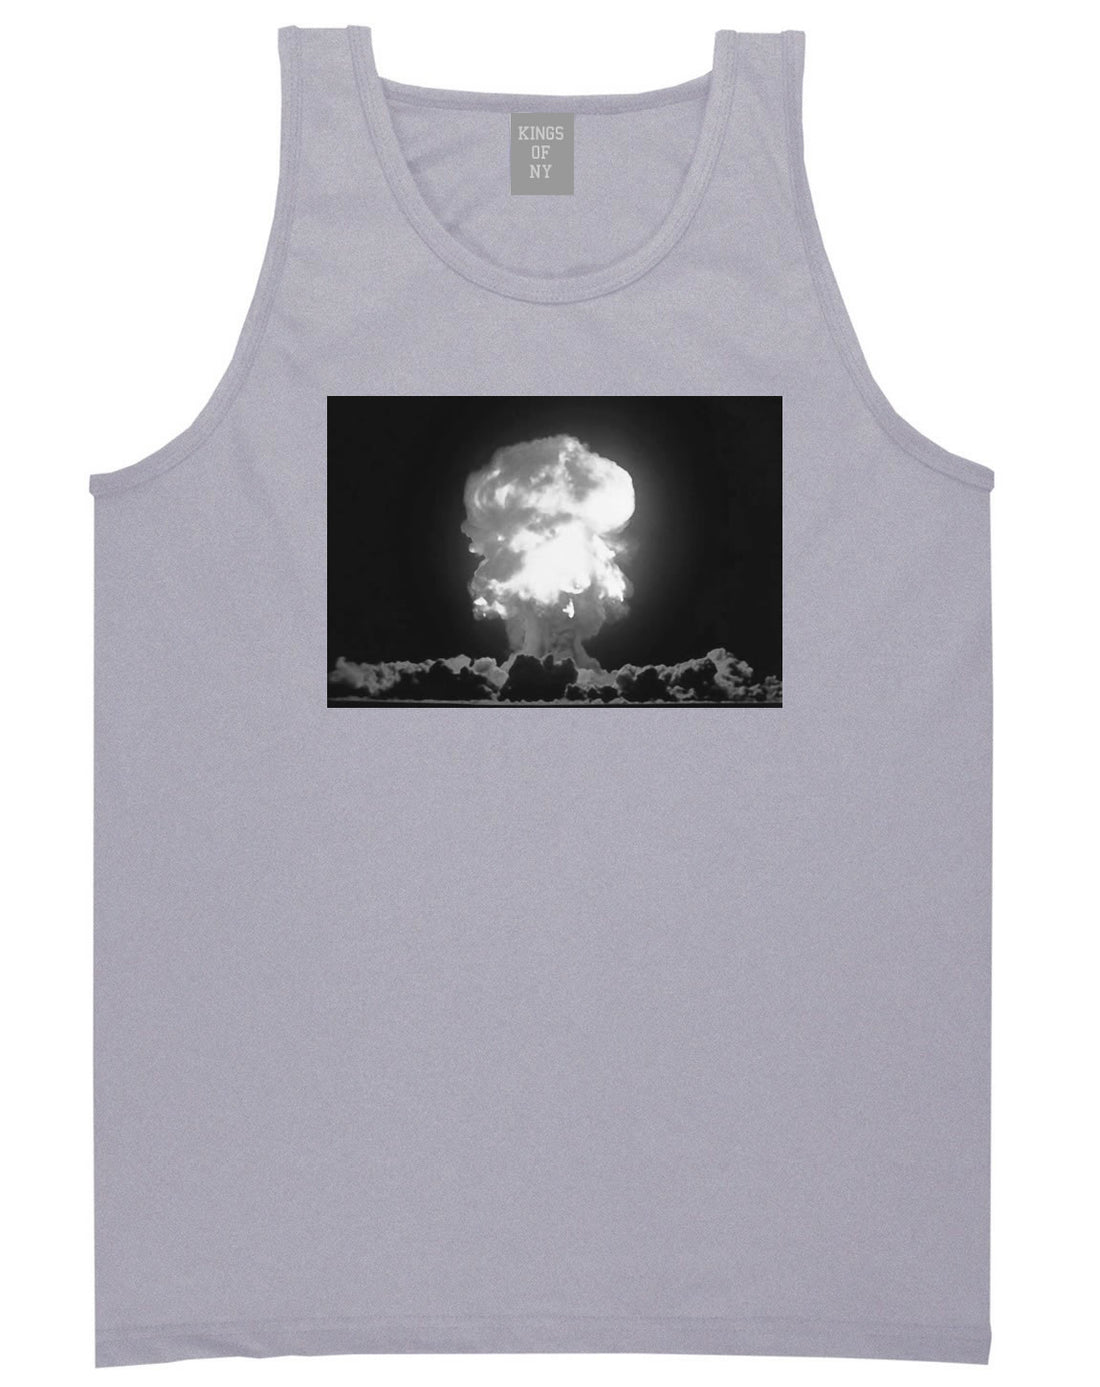 Explosion Nuclear Bomb Cloud Tank Top in Grey By Kings Of NY